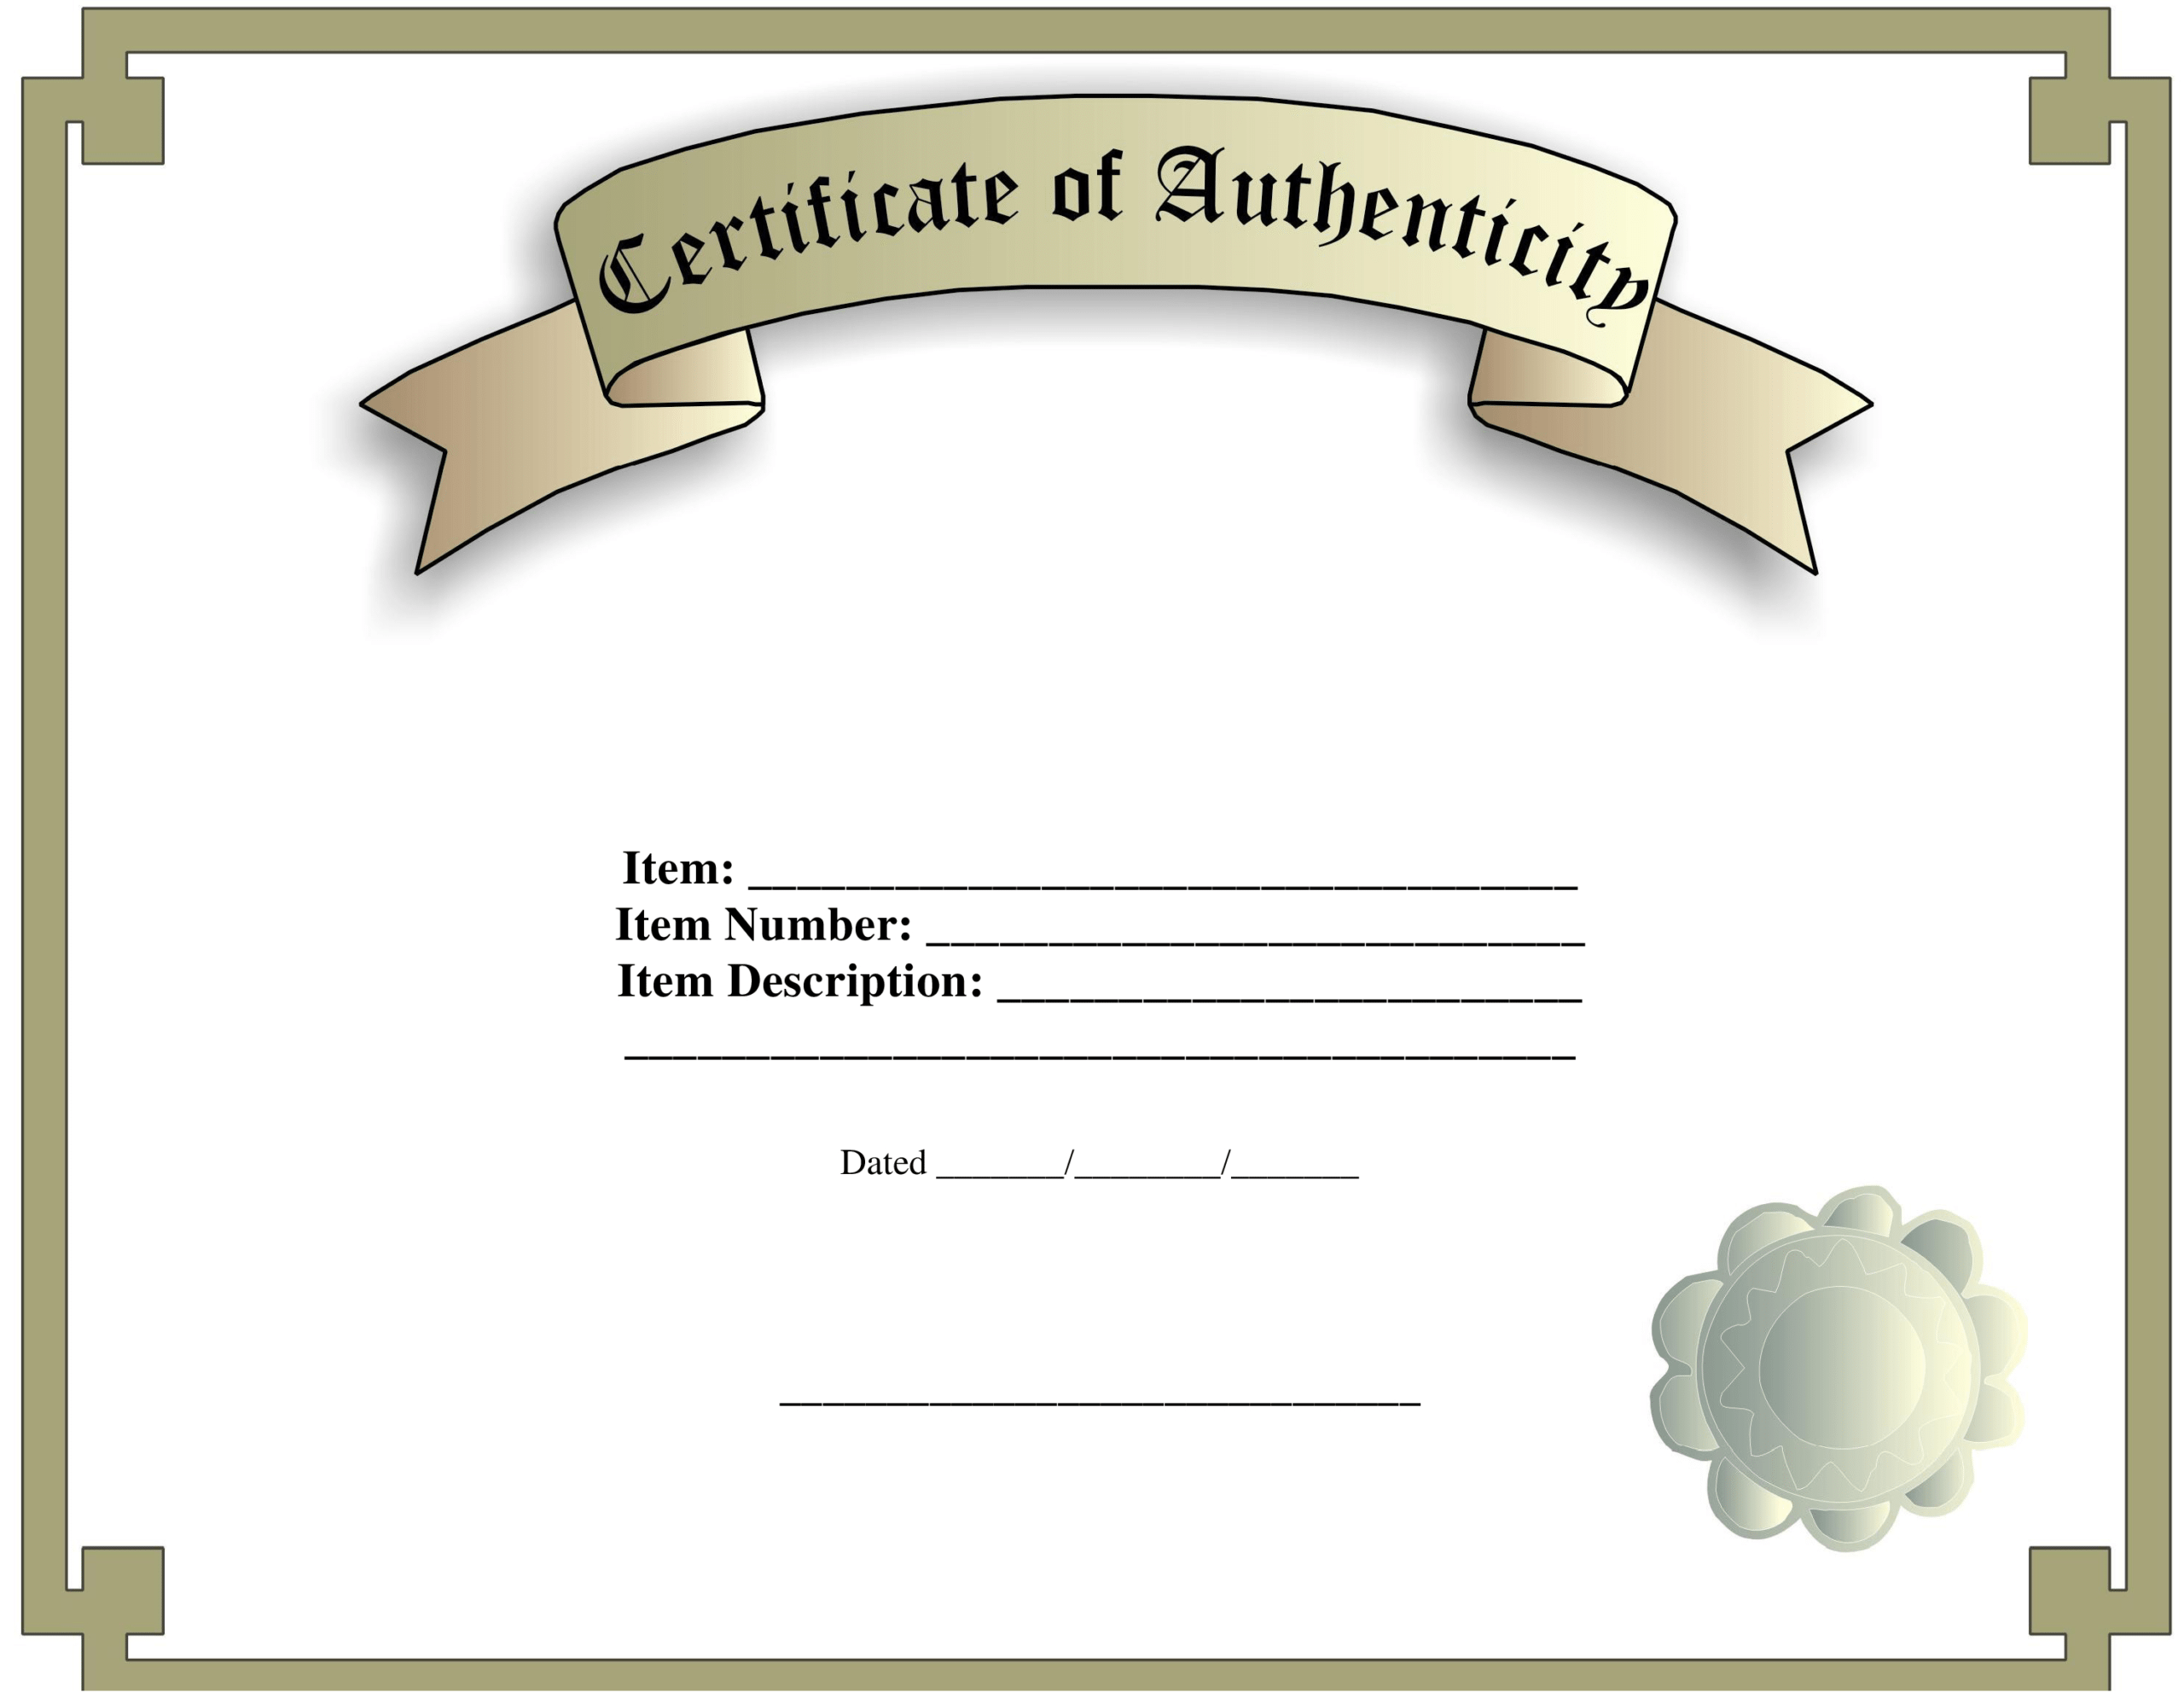 Certificates Of Authenticity Templates – Milas With Regard To Certificate Of Authenticity Photography Template